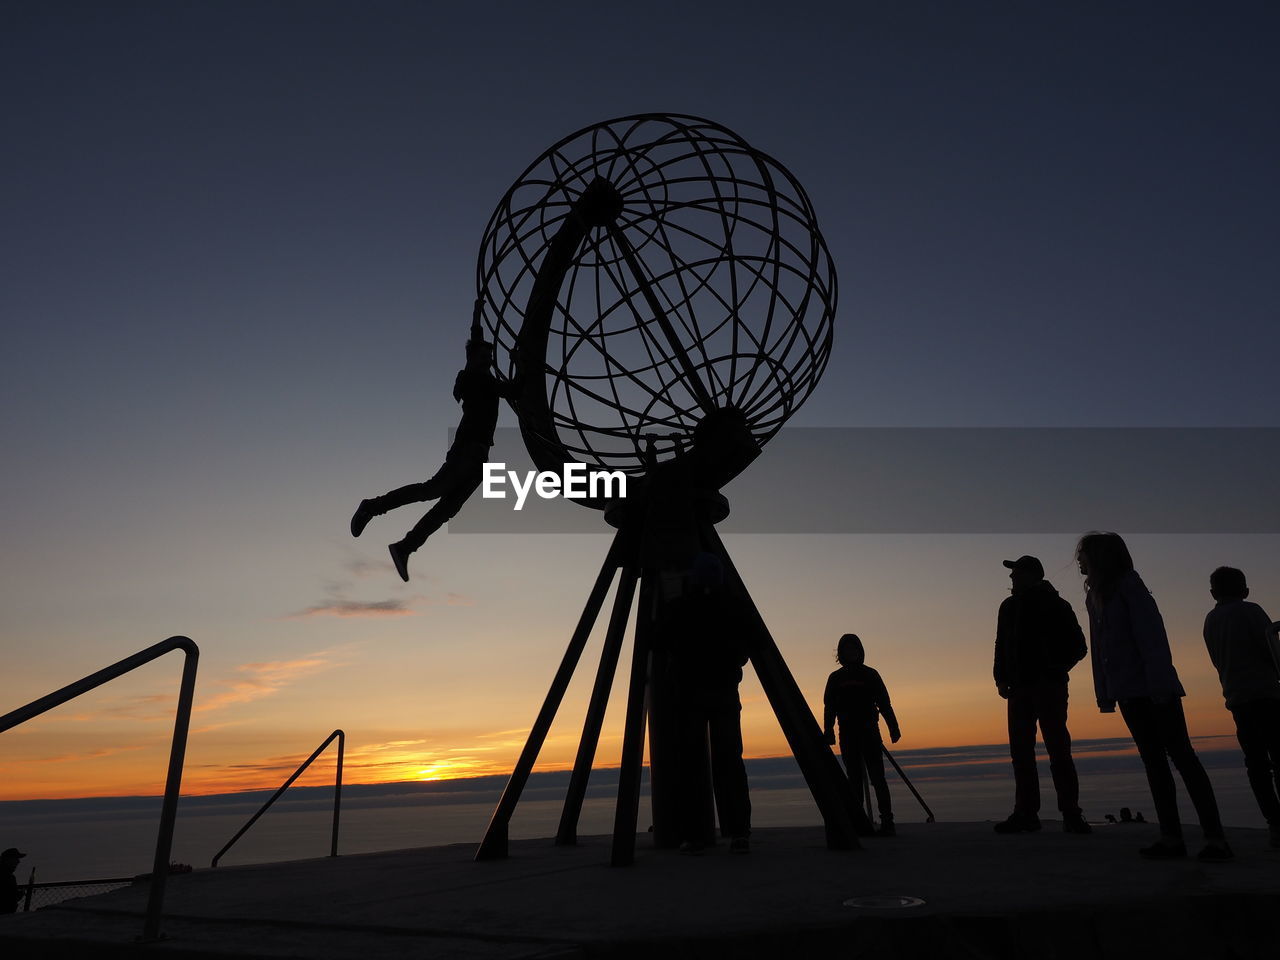 Silhouette people by metallic globe structure against clear sky during sunset